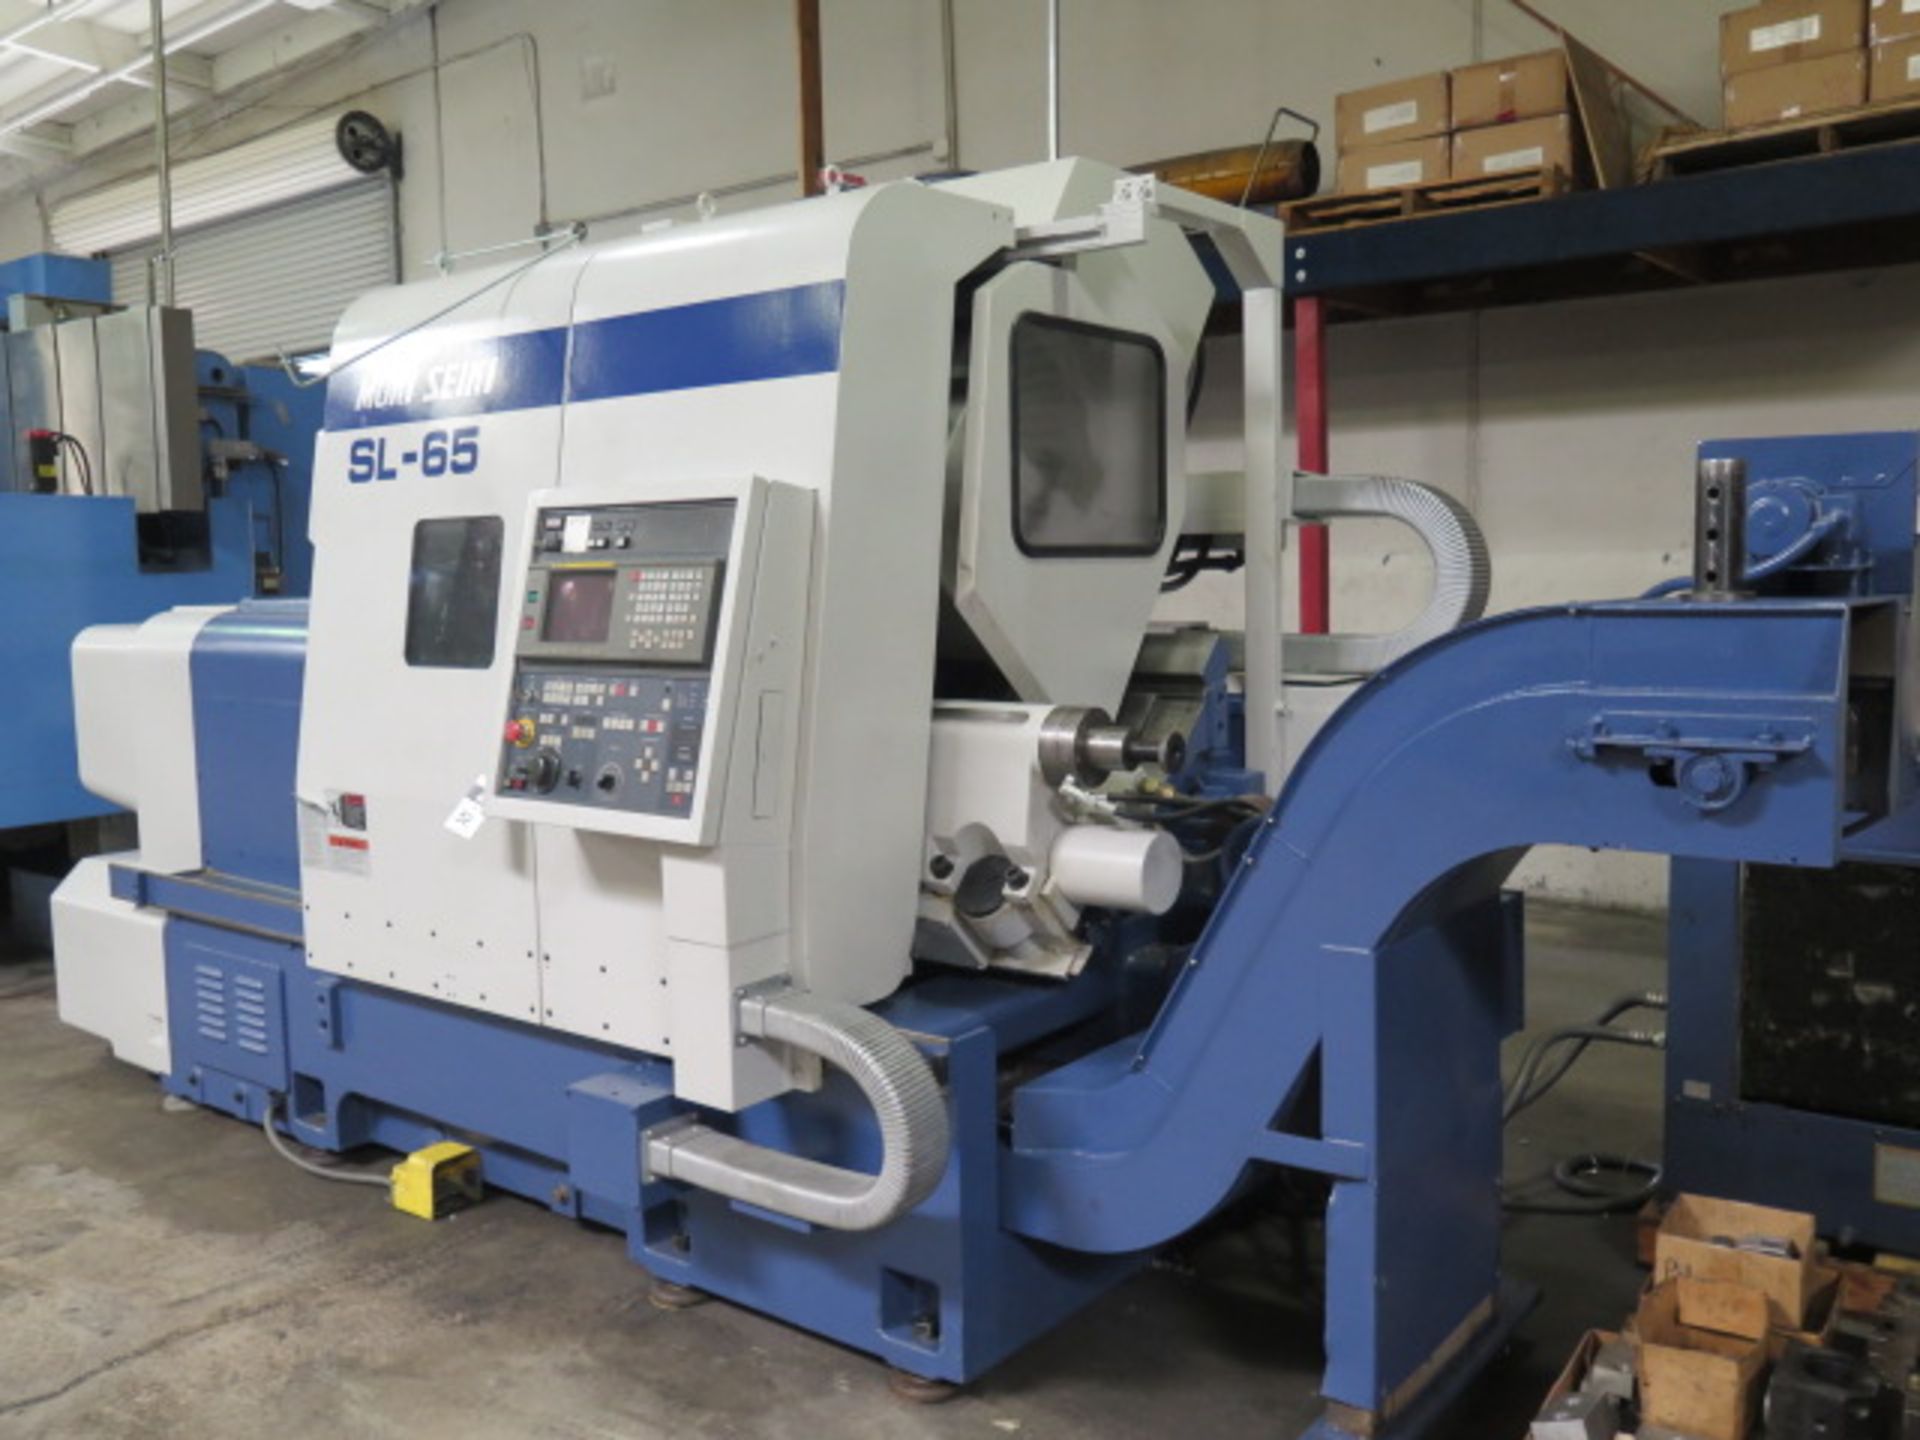 Mori Seiki SL-65A CNC Turning Center s/n 1146 w/ Fanuc Series MF-T6 Controls, SOLD AS IS - Image 3 of 16